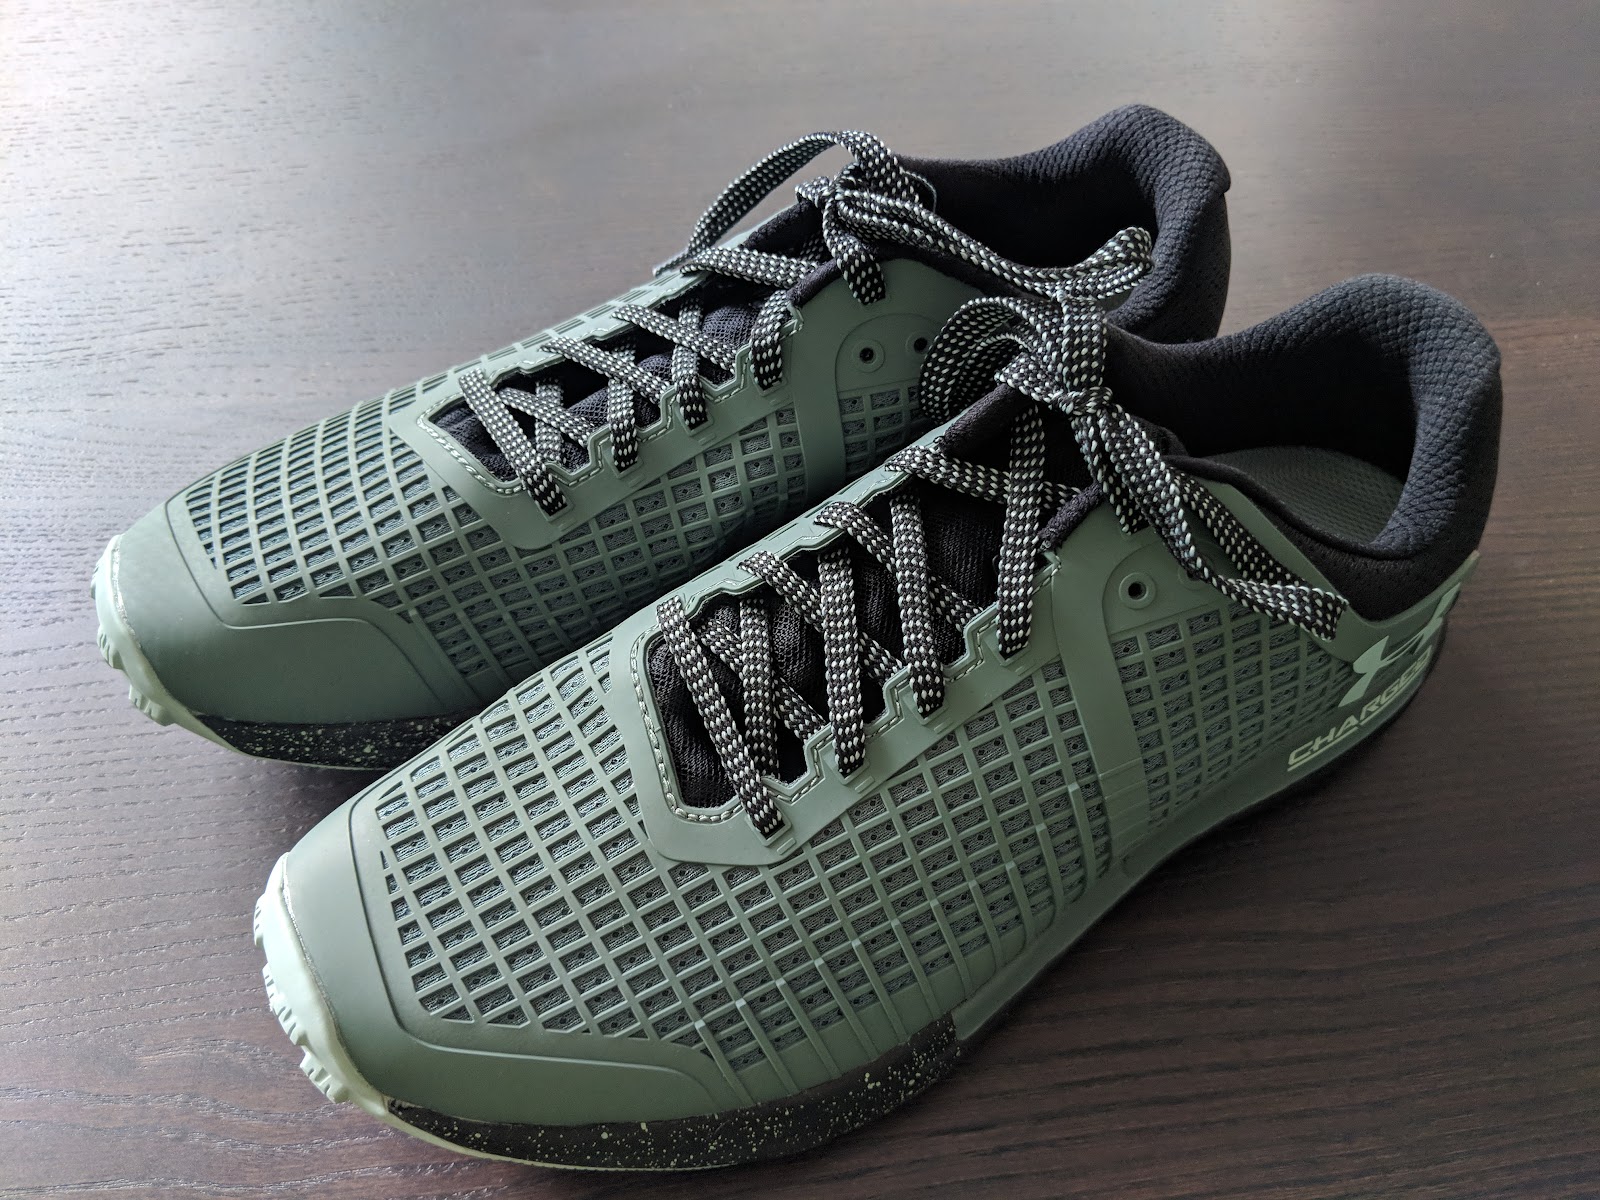 Road Run: Under Armour UA Horizon BPF "Bullet Proof Feather" Review: Well Balanced, Confounding Expectations, Big Time!